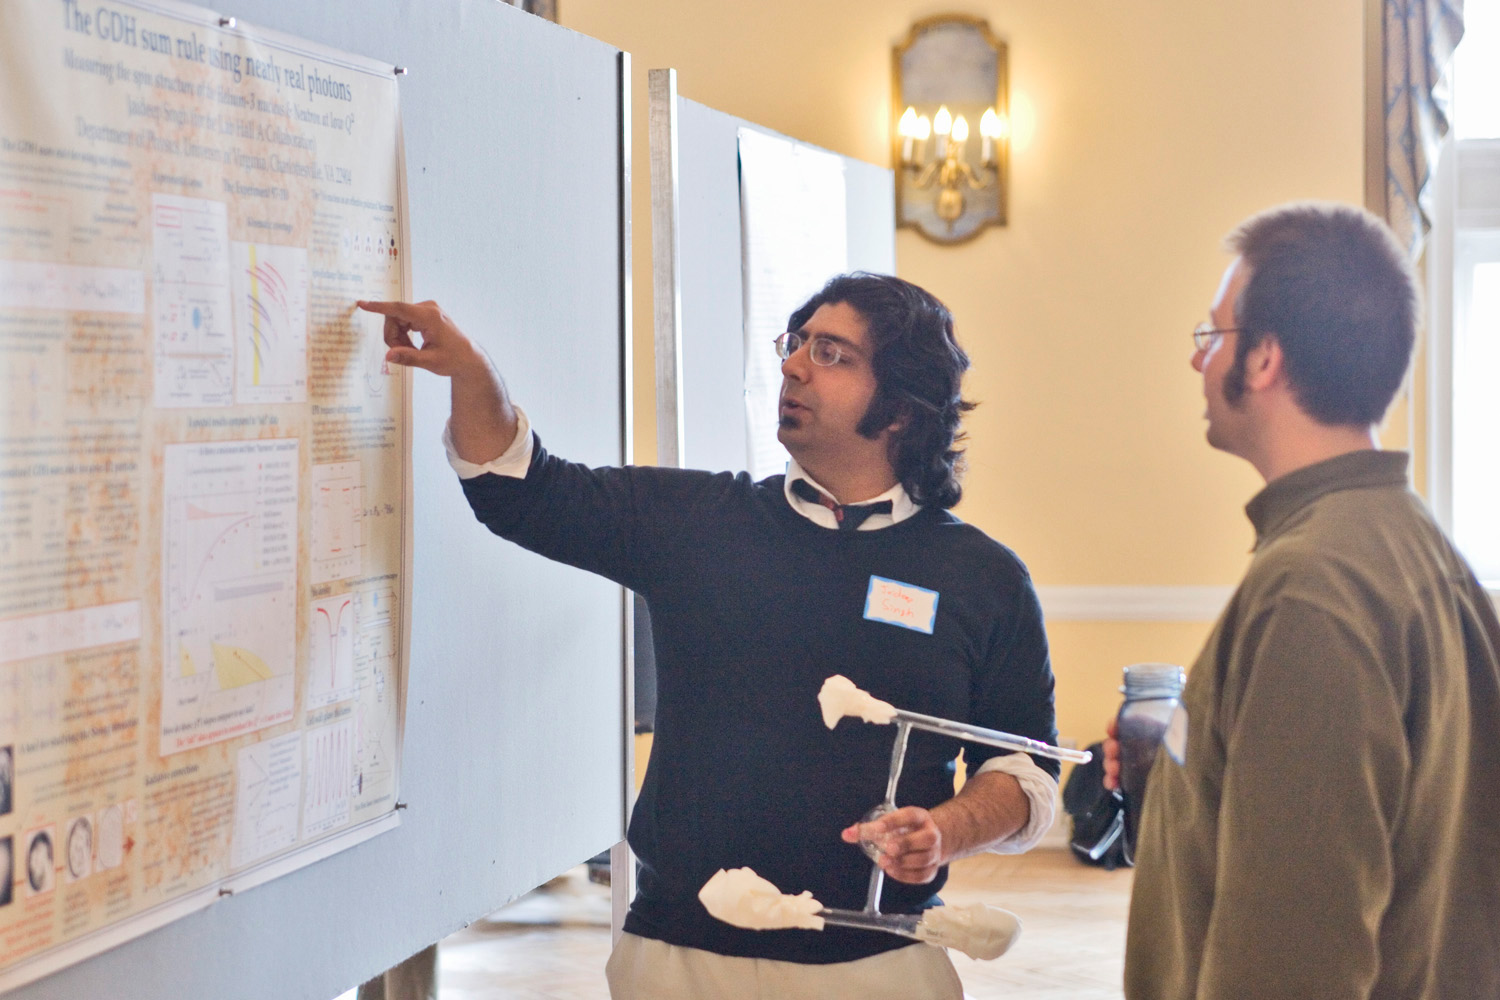 Robert J. Huskey talks to a man about his poster presentation